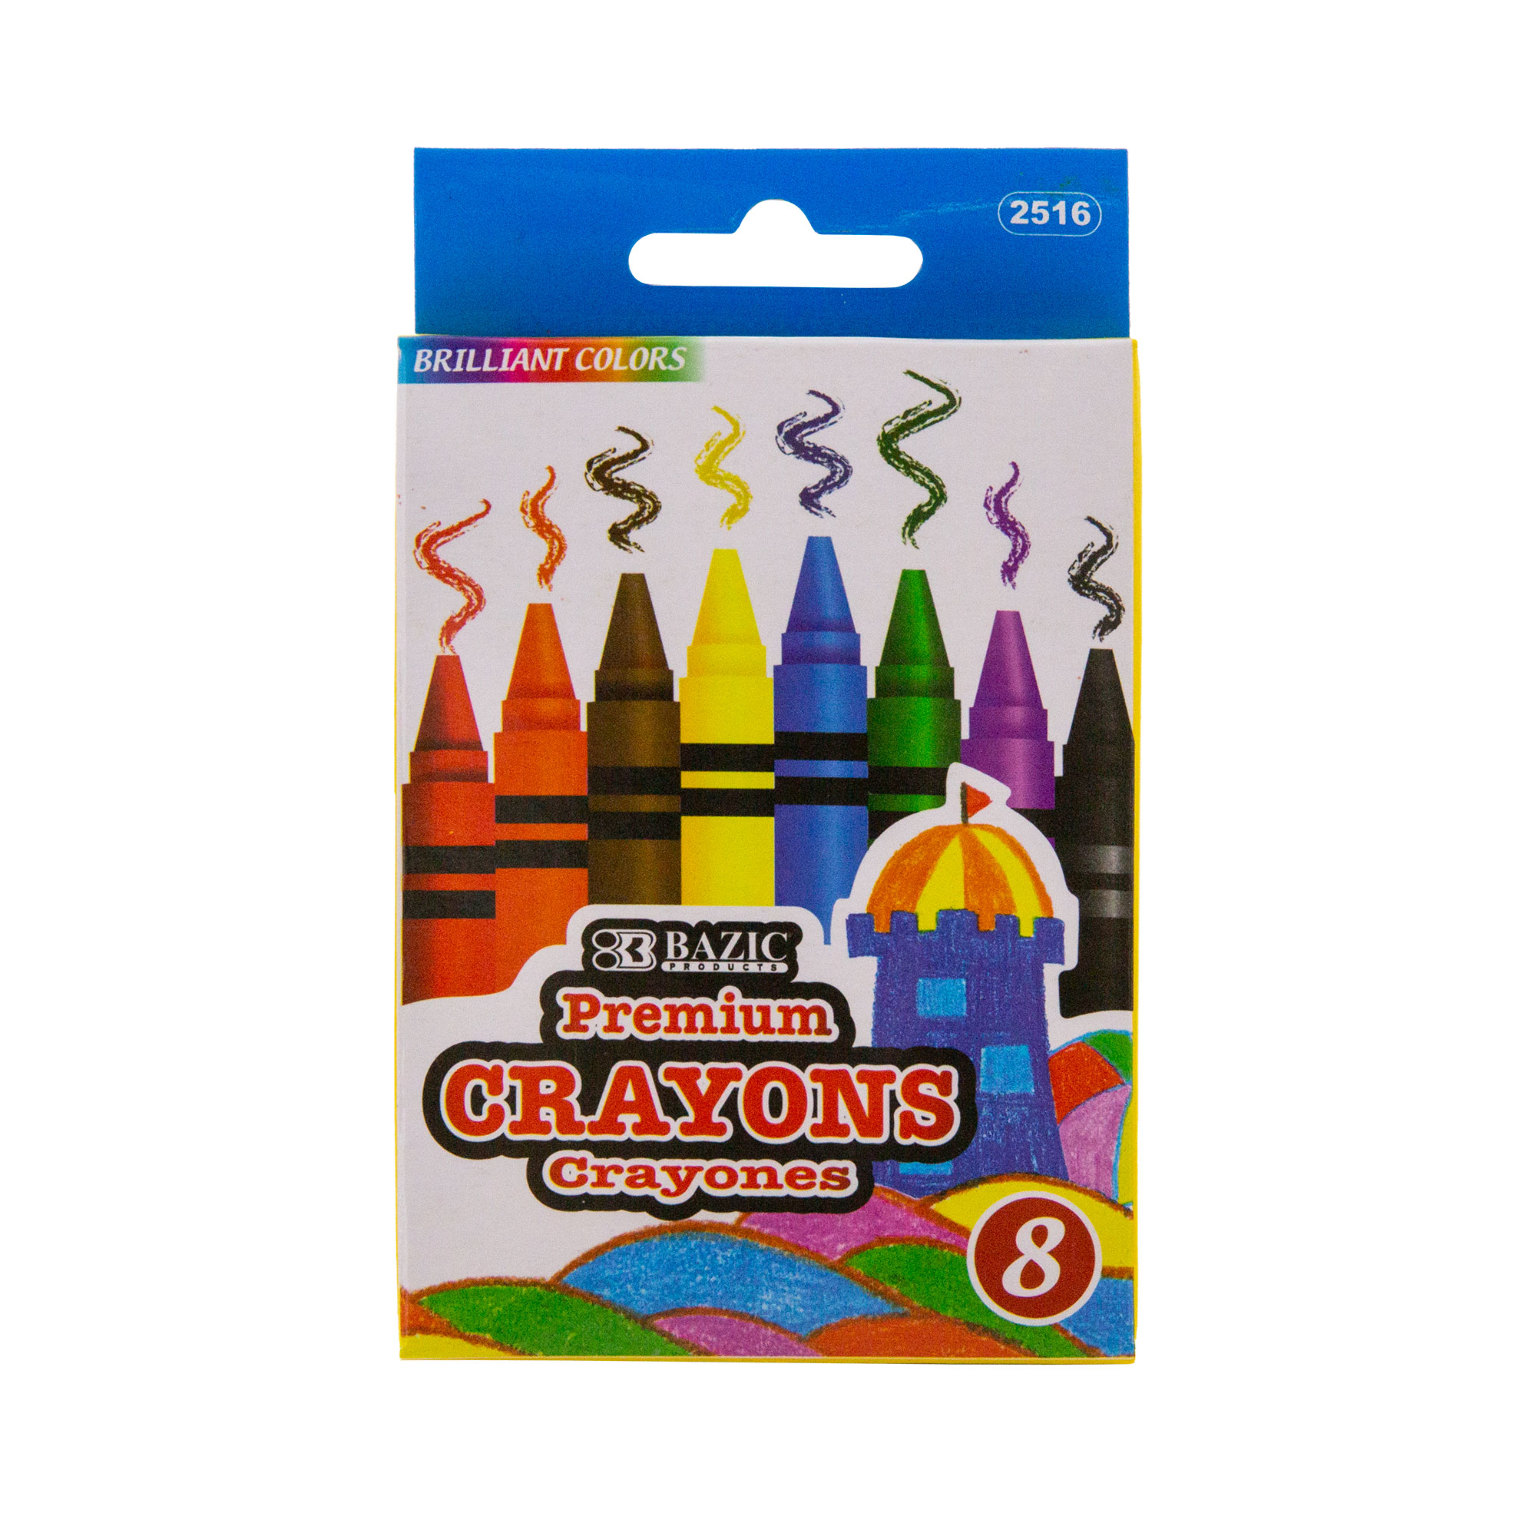 2 Pack of Crayons with Crayon Sharpener, Crayons 16 Count